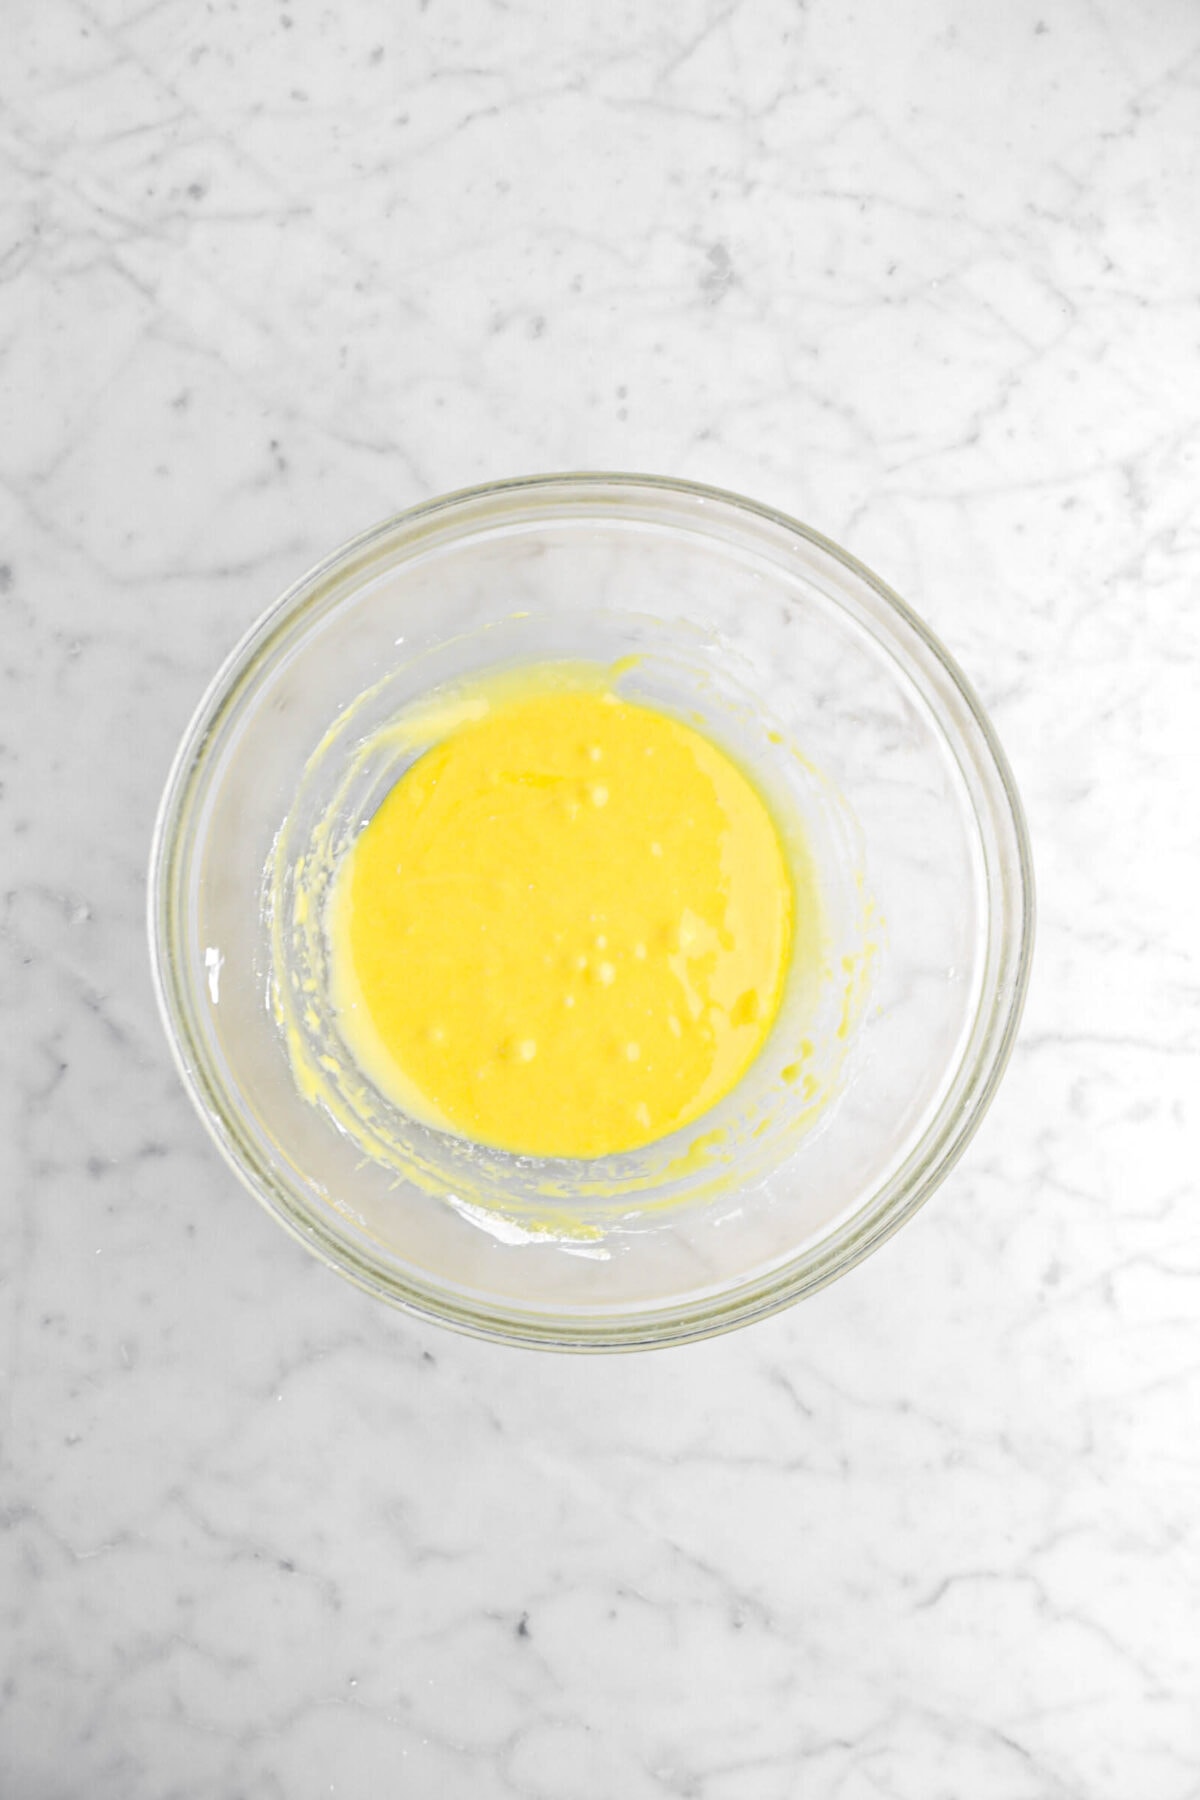 egg yolks and corn starch whisked together.